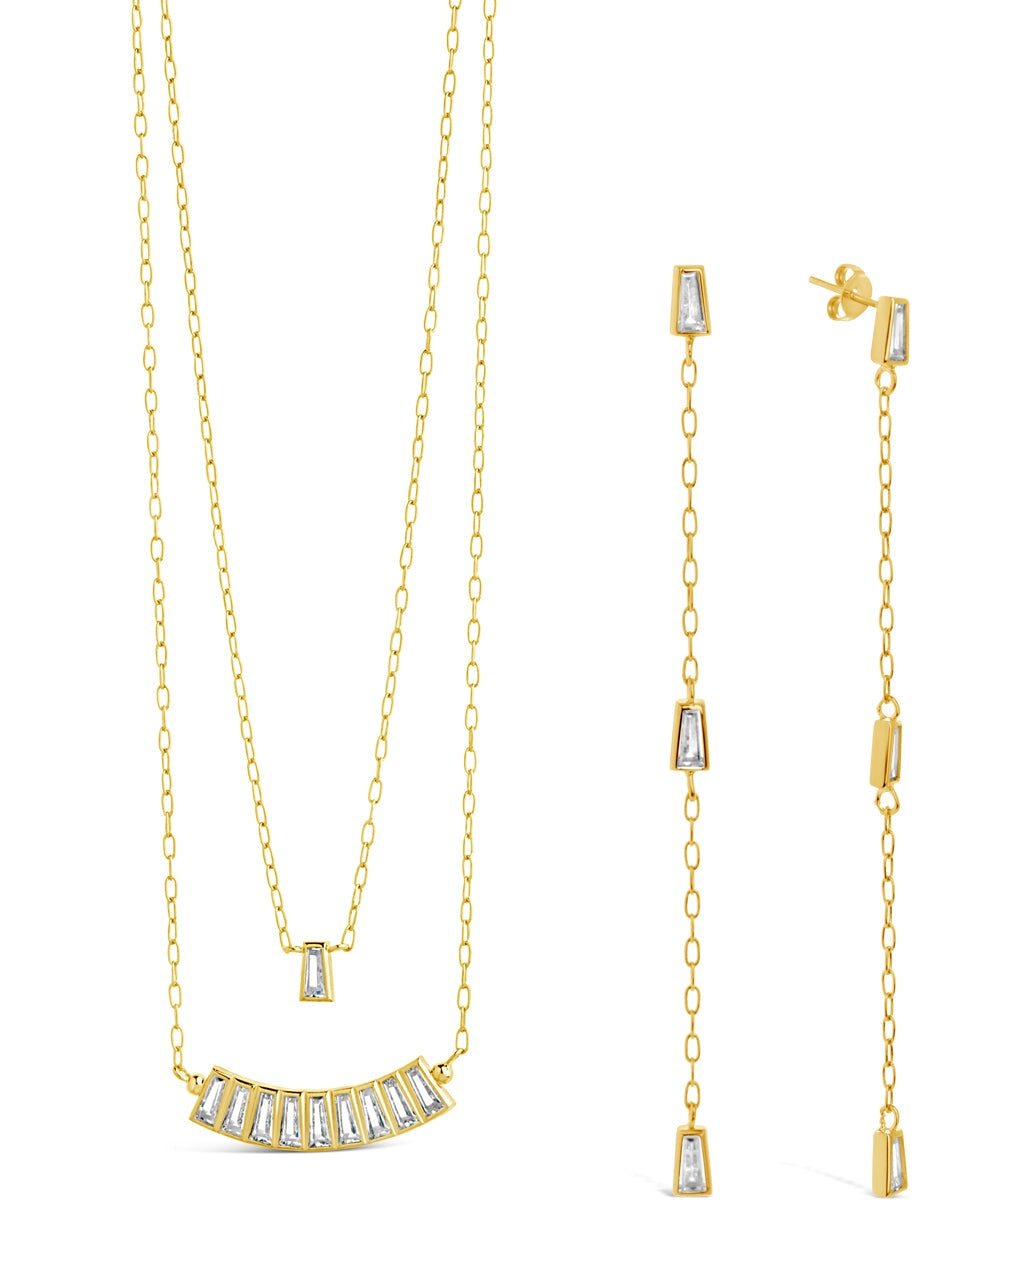 Tapered CZ Drop Earrings & Layered Necklace Set Bundles Sterling Forever Gold 